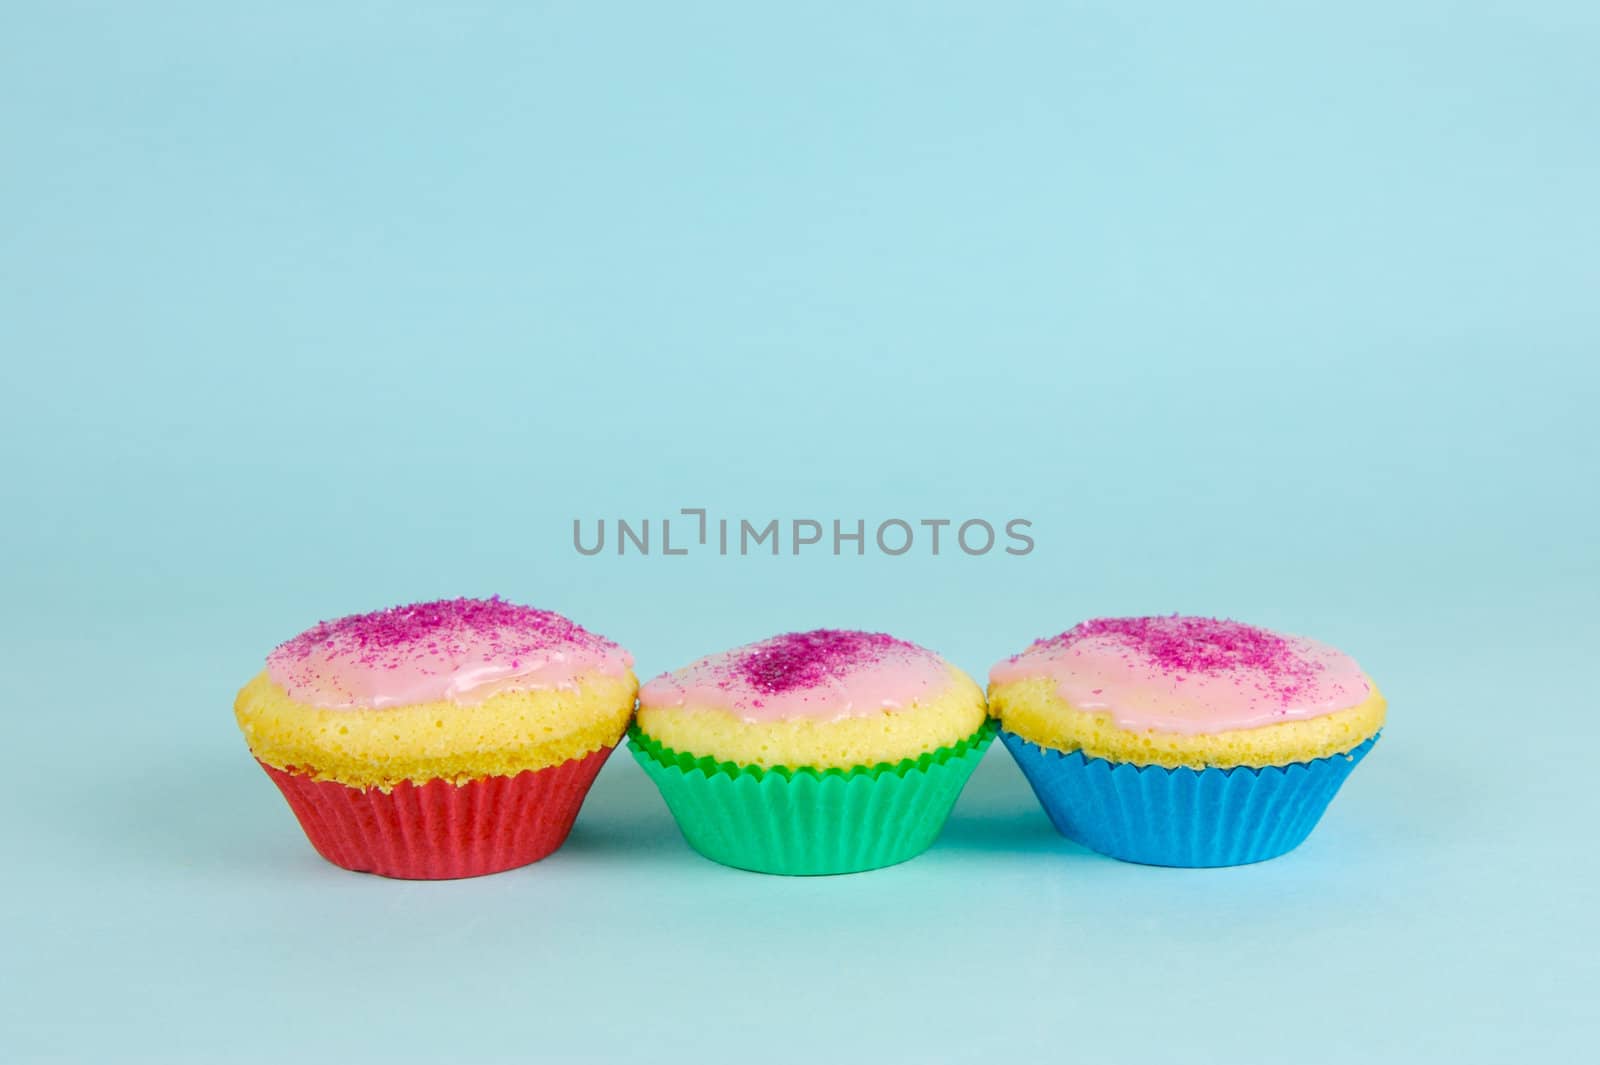 Cup cakes isolated against a blue background